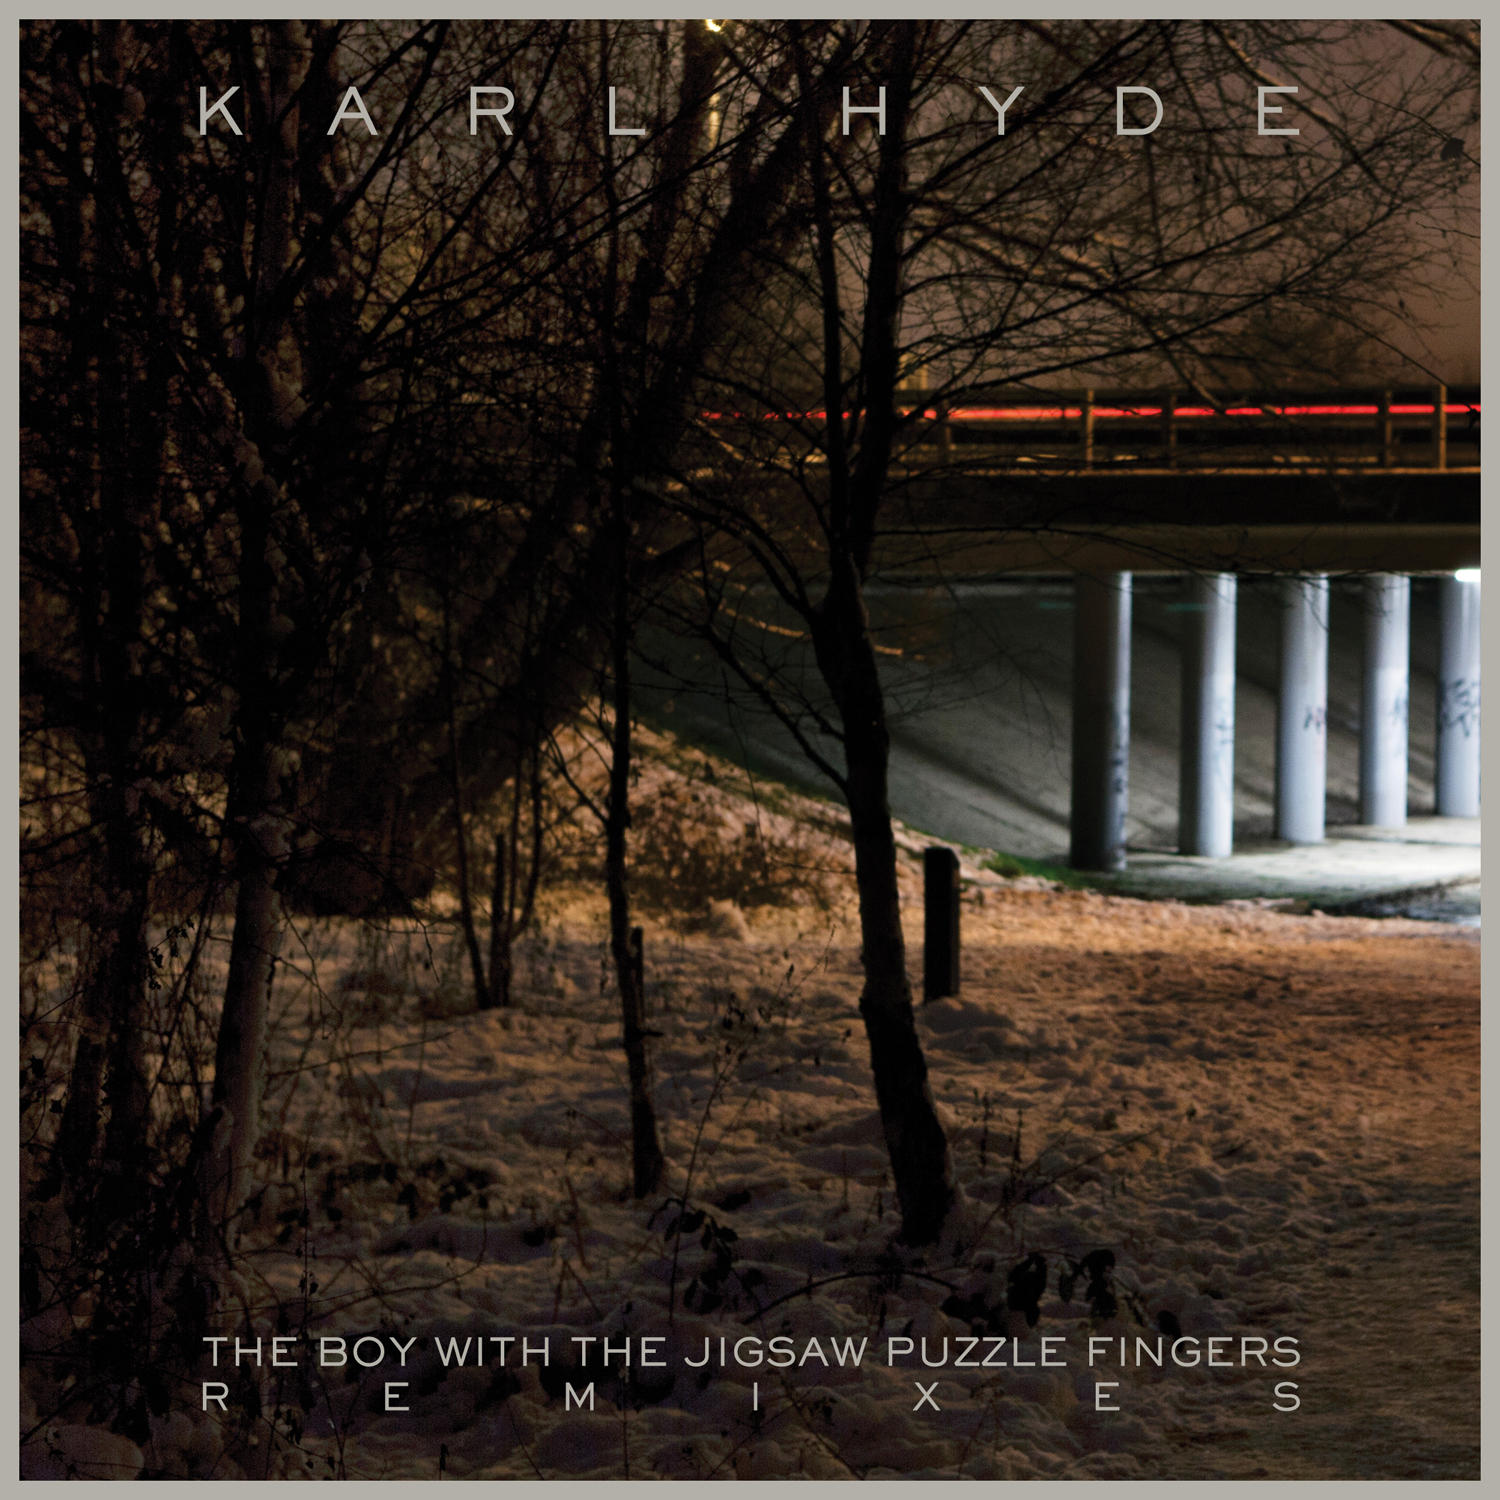 Karl Hyde - The Boy With The Jigsaw Puzzle Fingers